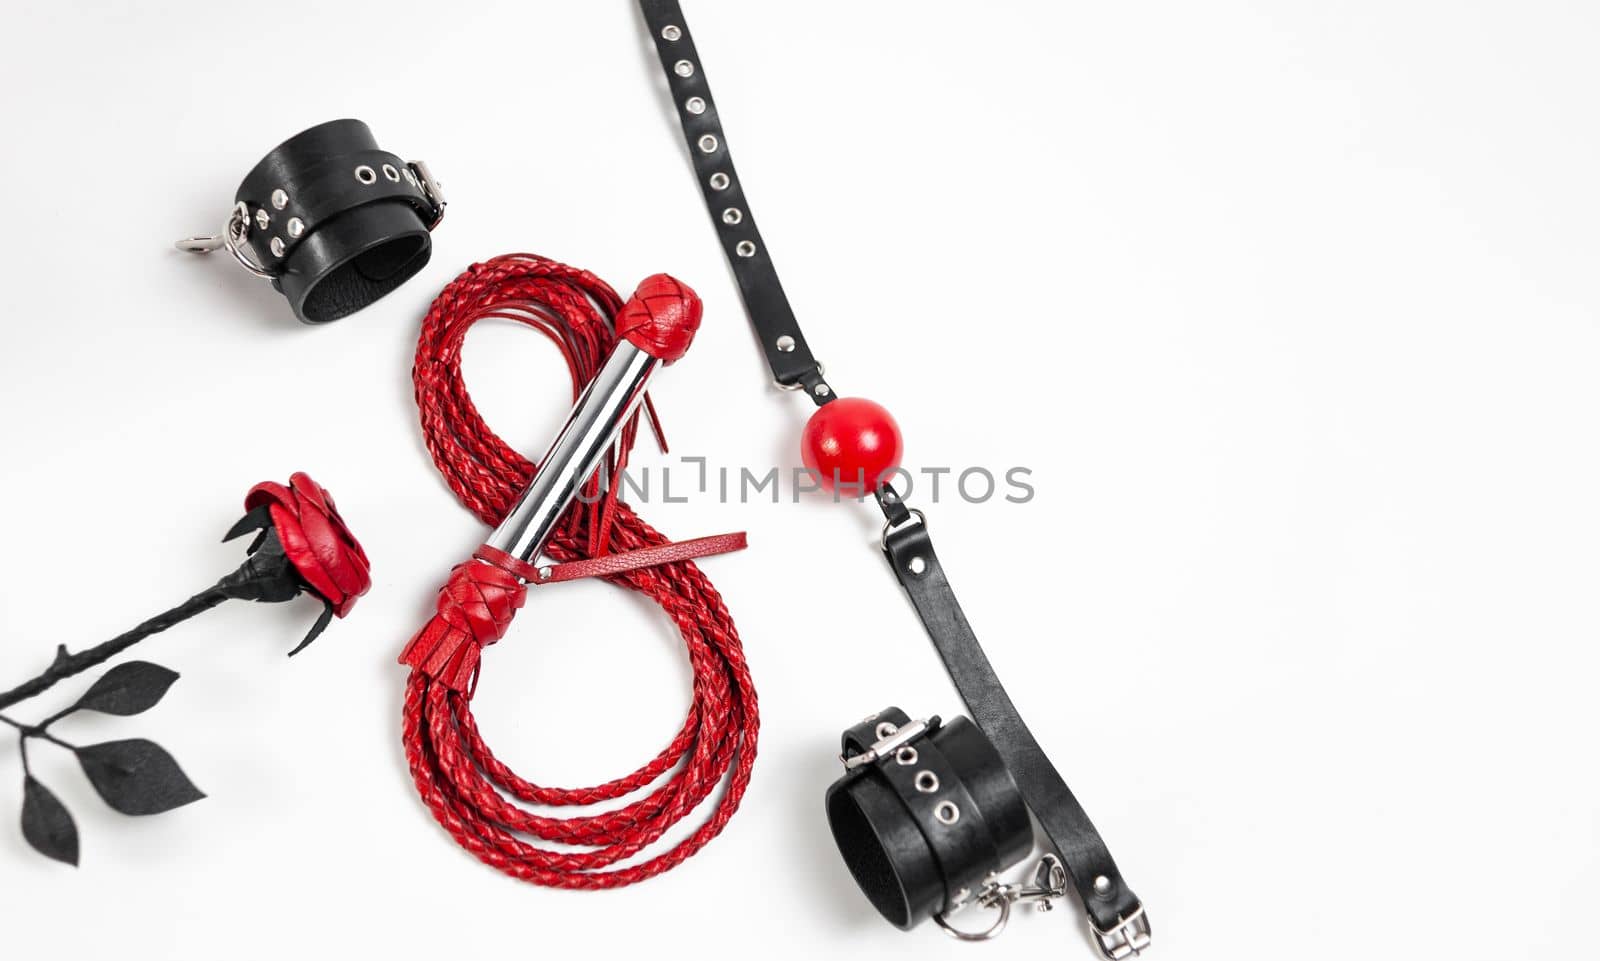 For the March 8 women's day holiday sexy bdsm sex play accessories set from a sex shop on a white background copy-paste by Rotozey